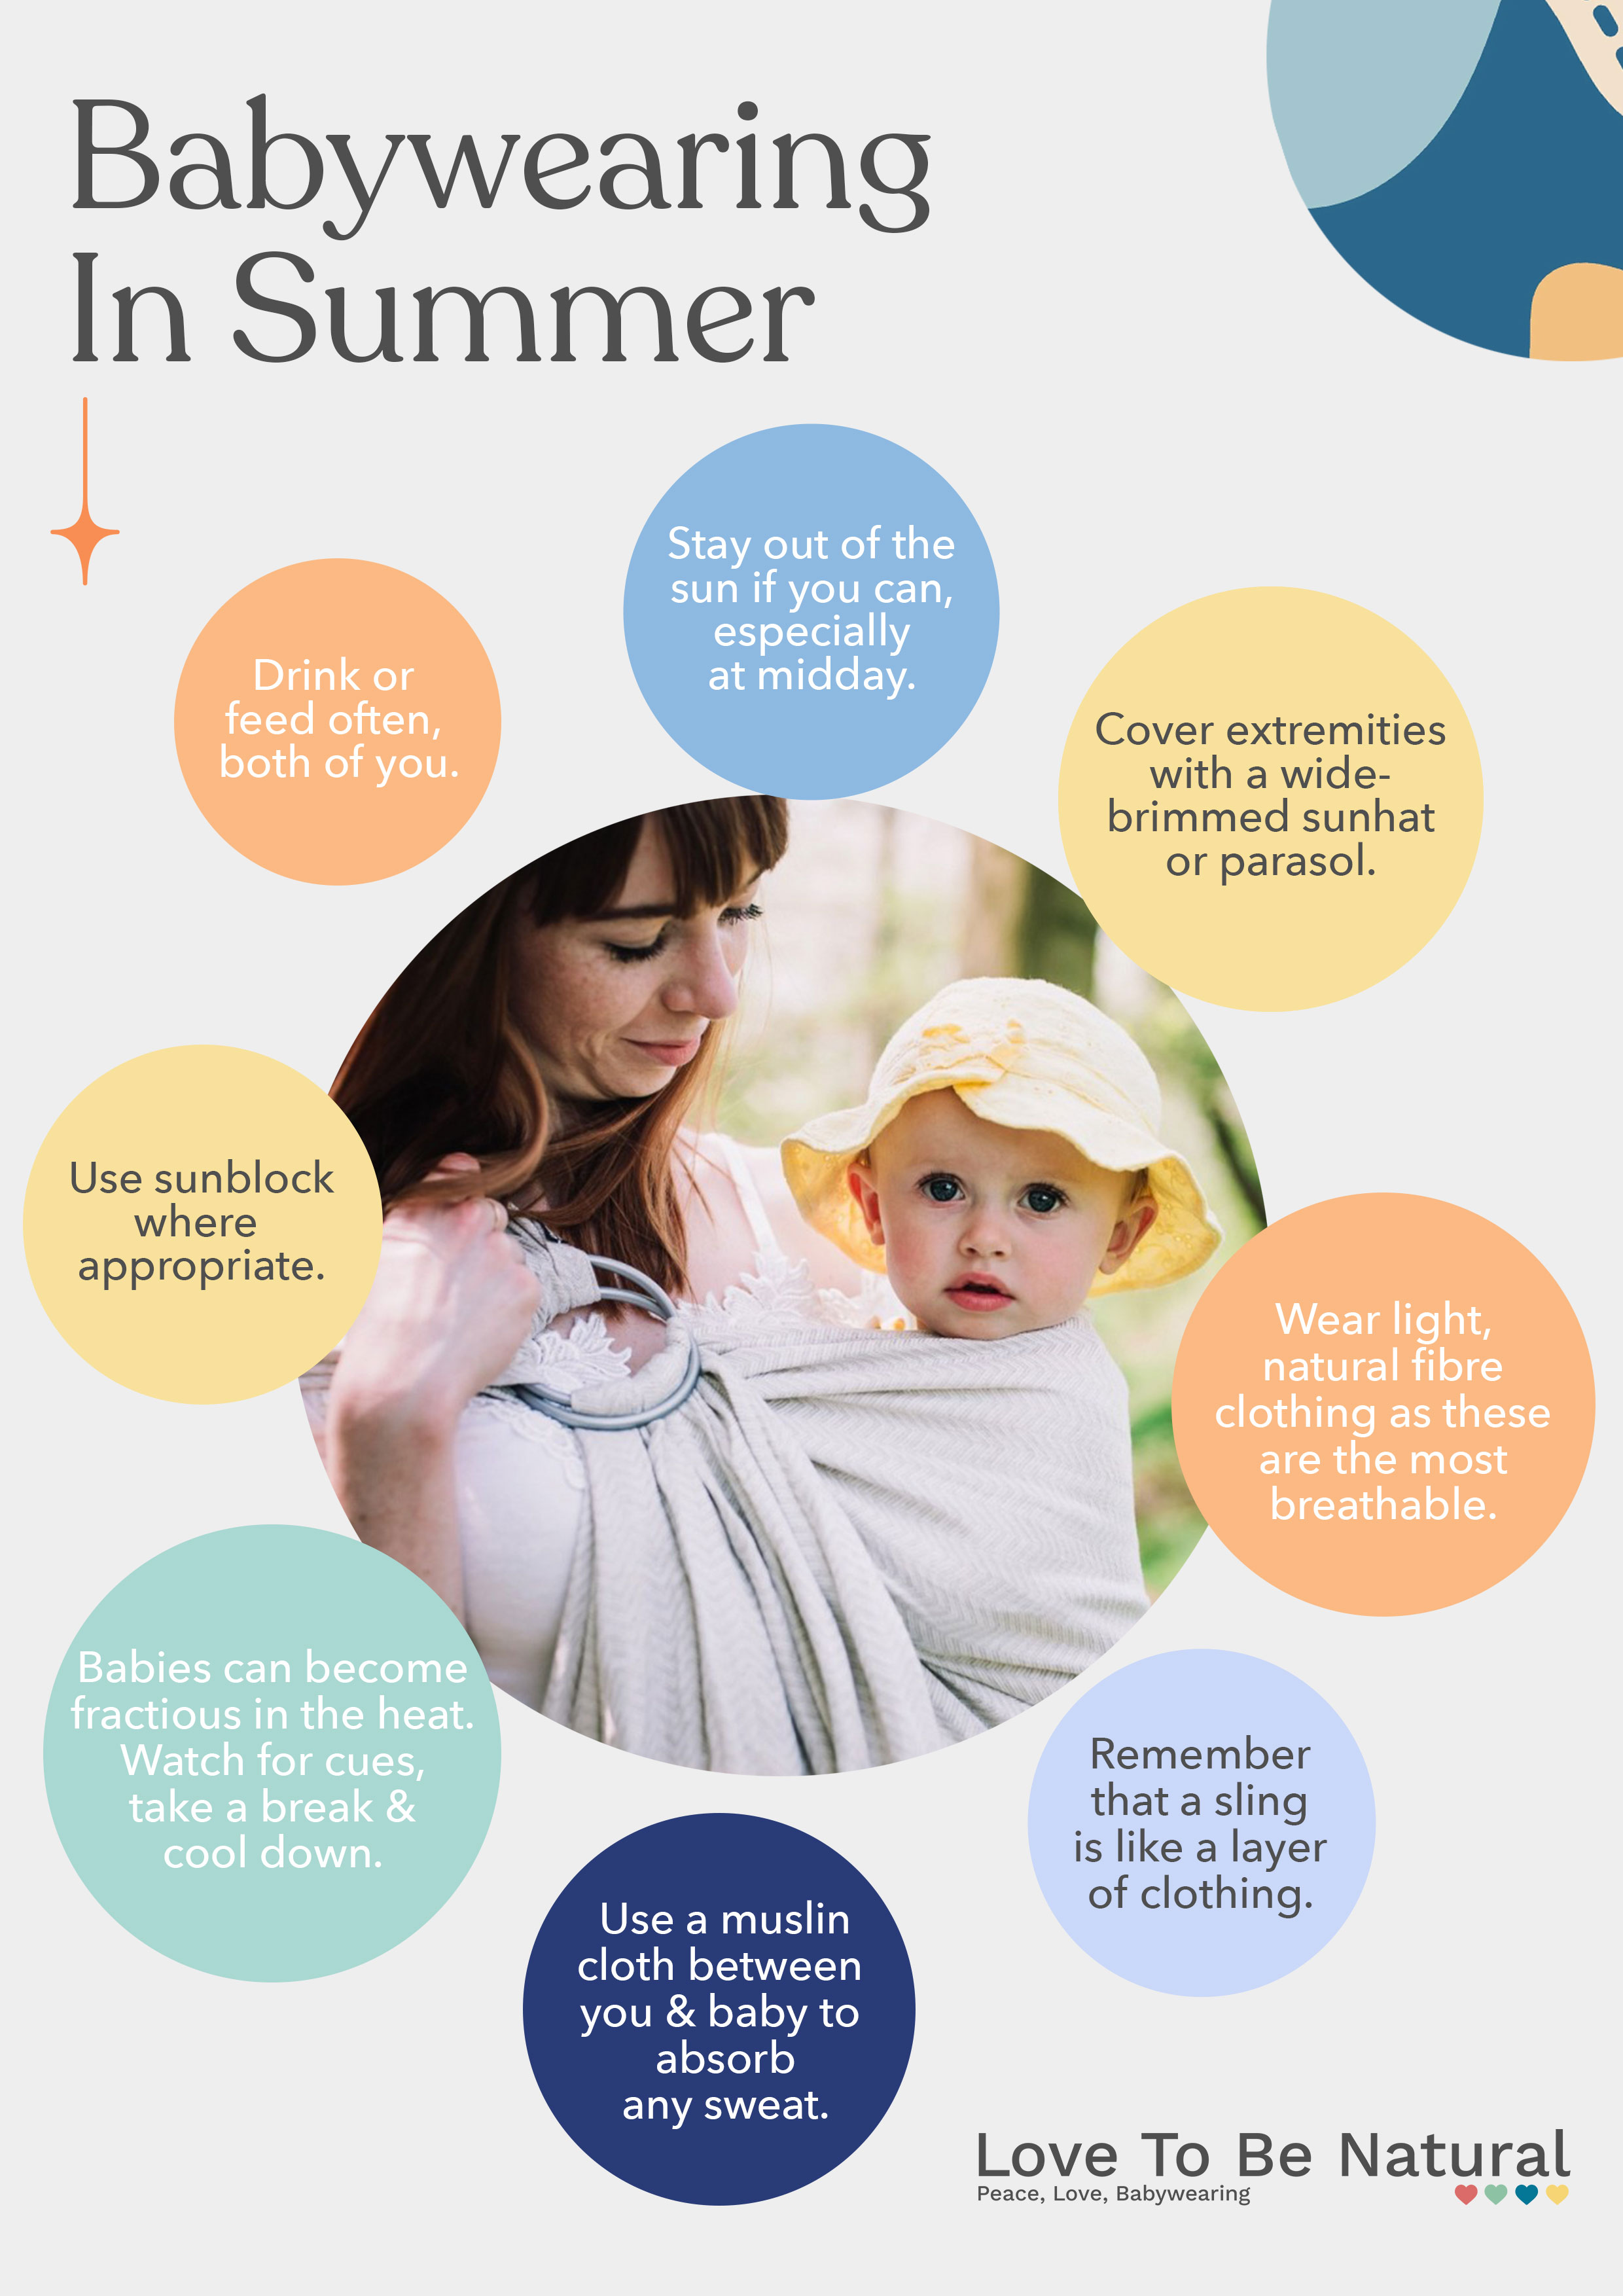 Babywearing In Summer and Warm Weather Infographic